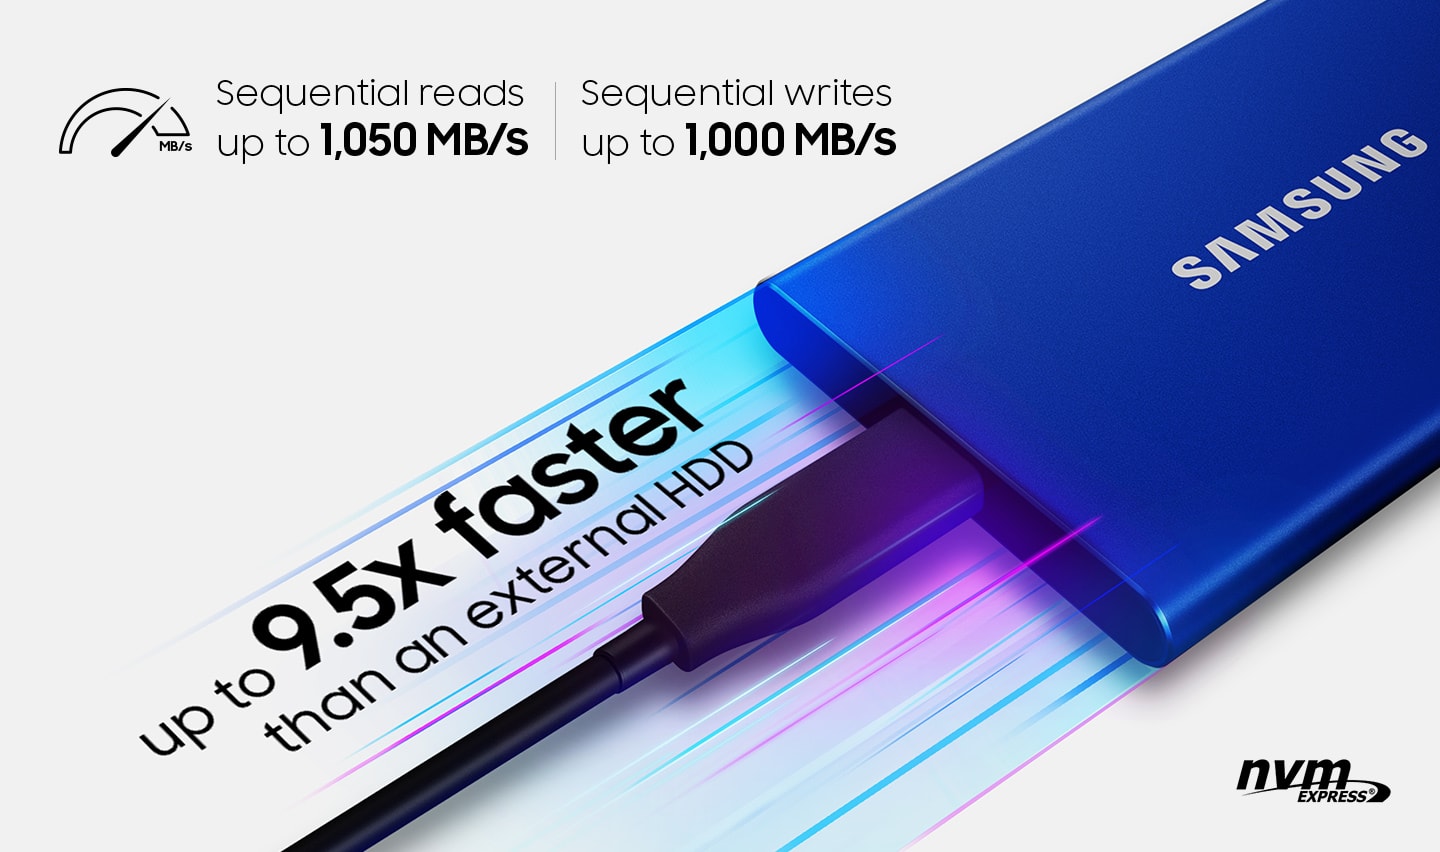 Samsung Portable SSD T7 Touch has sequential reads up to 1,050 MB/s and sequential writes up to 1,000 MB/s, which is up to 9.5x faster than an external HDD.